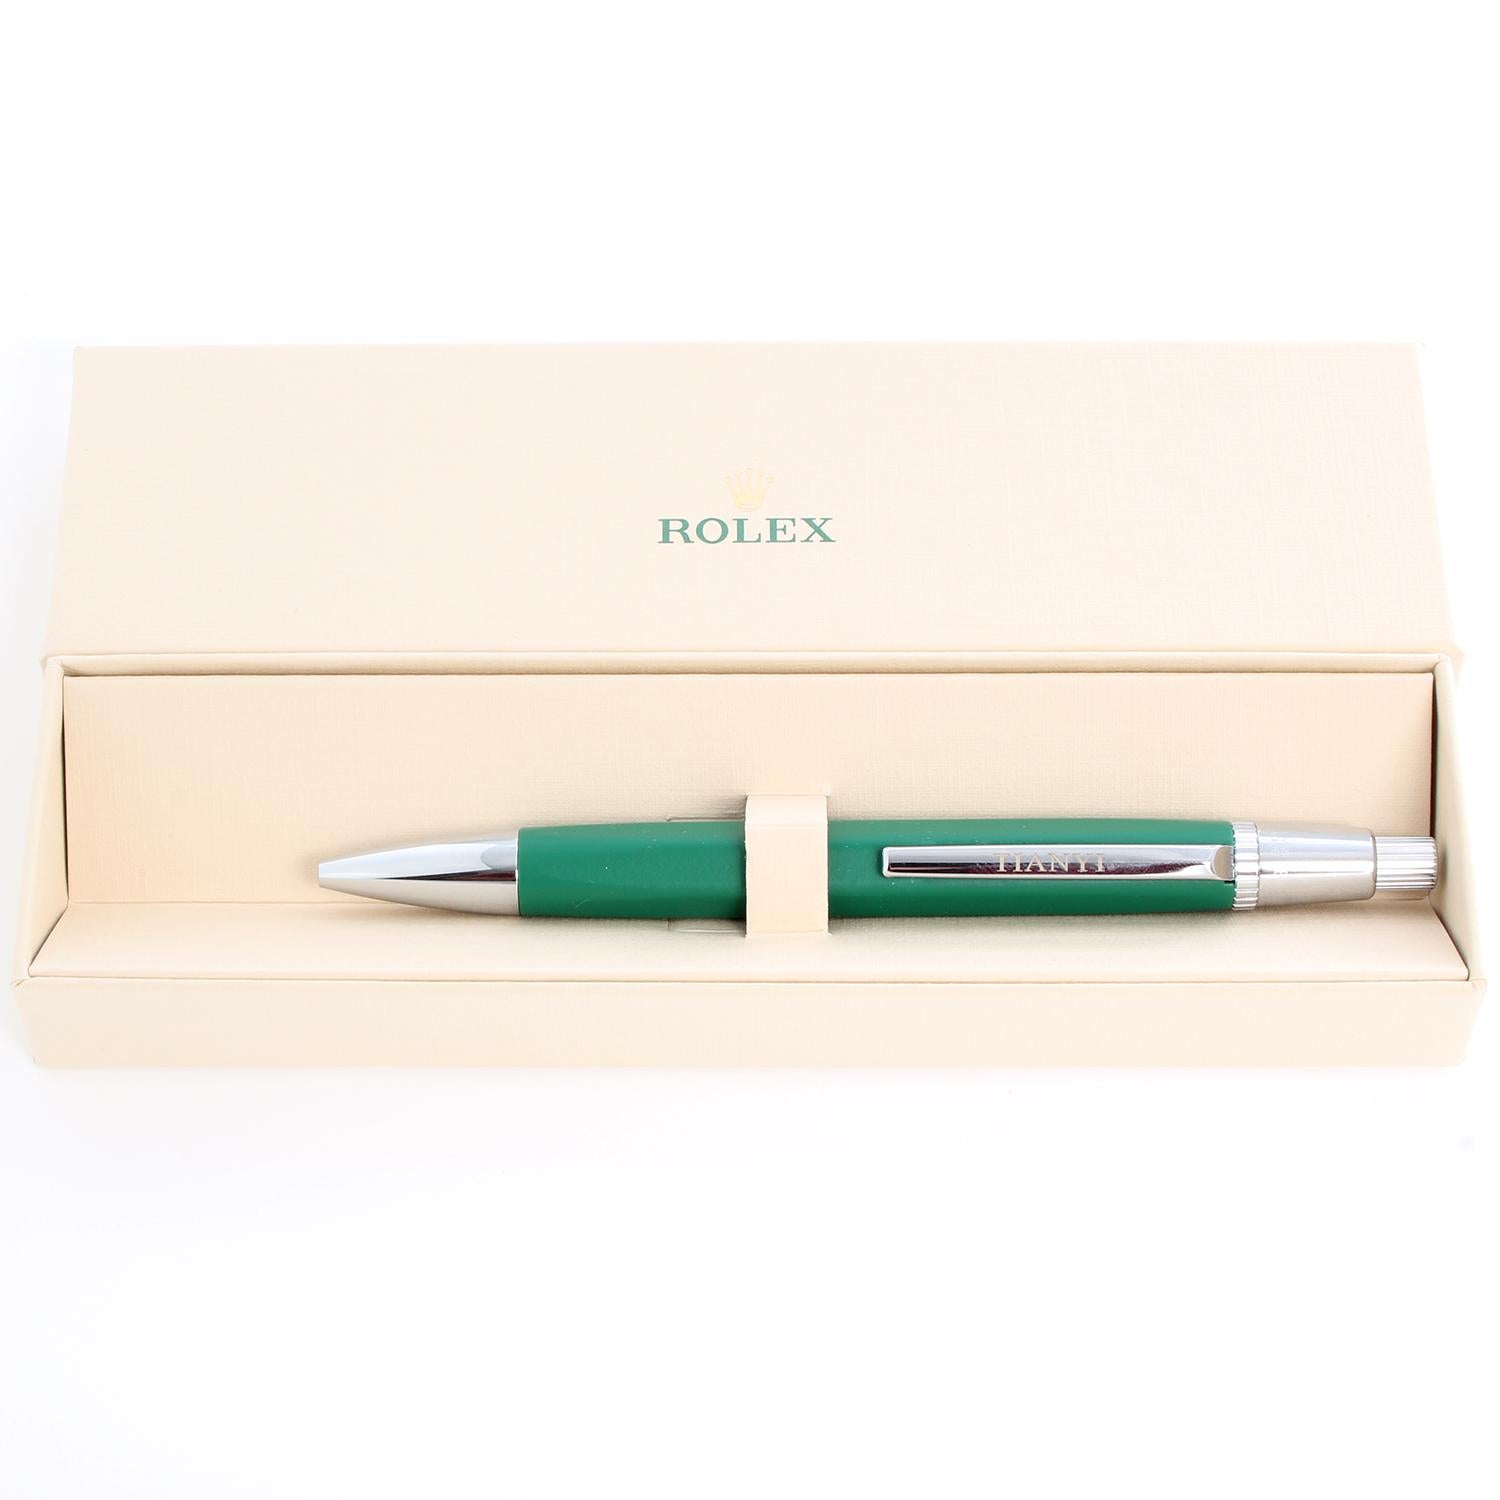 Rolex Ballpoint Push Pen - Green/ Silver Rolex pen with blue ink. Pre-owned with Rolex box. Measures 5.5 inches. Beautiful novelty gift.